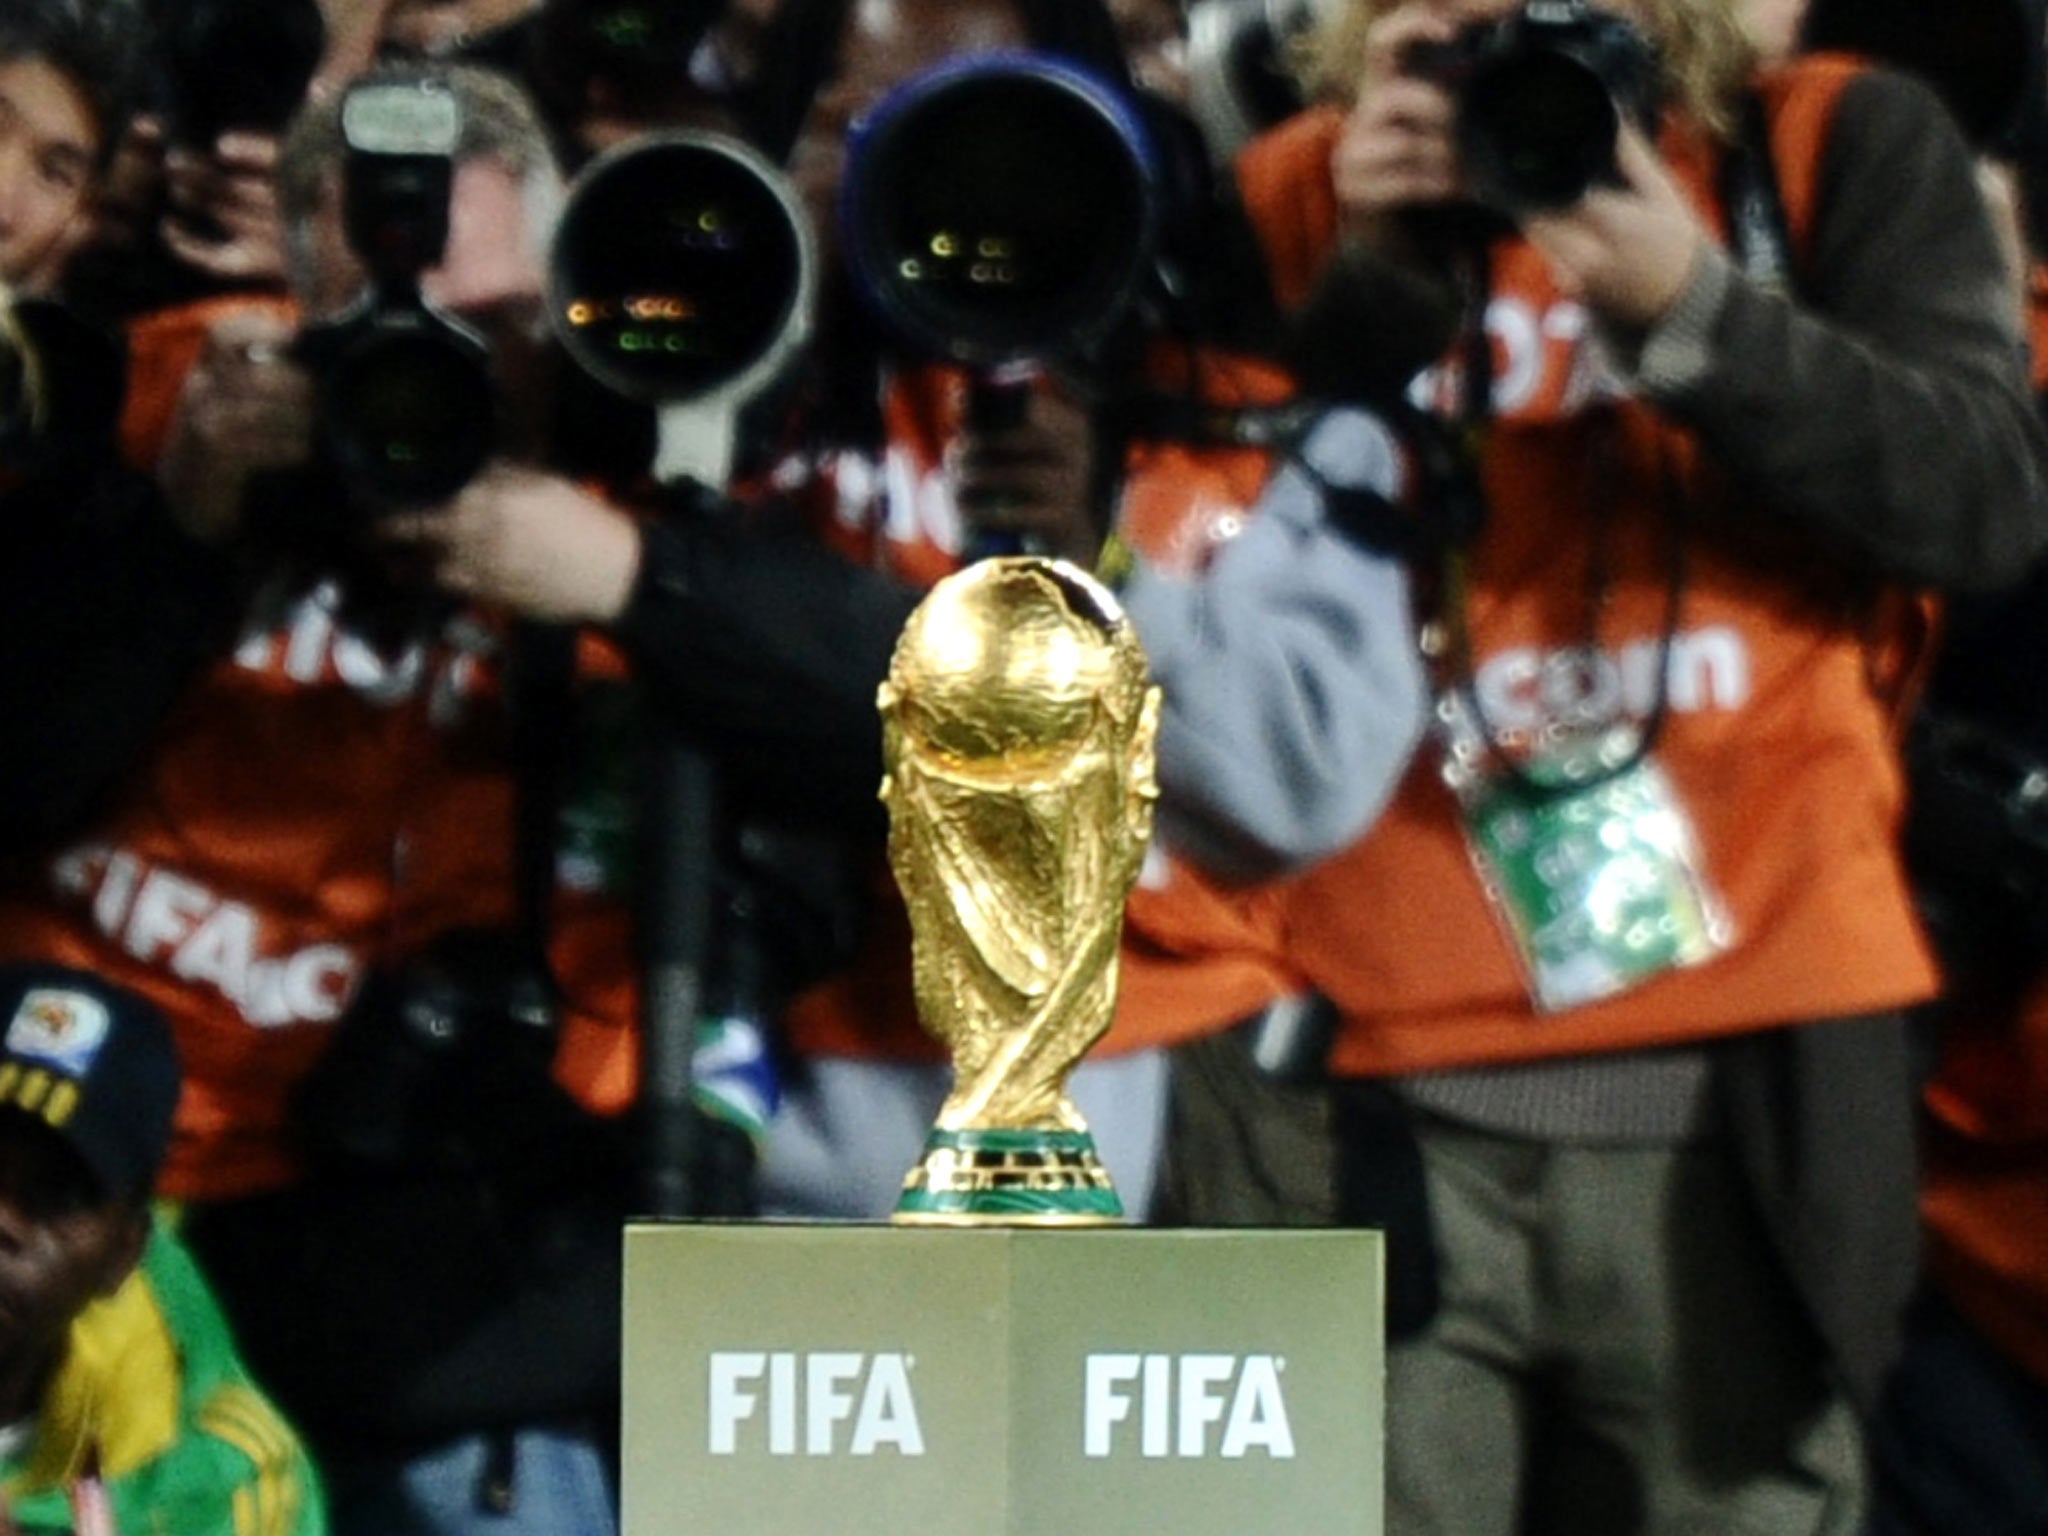 A view of the World Cup trophy